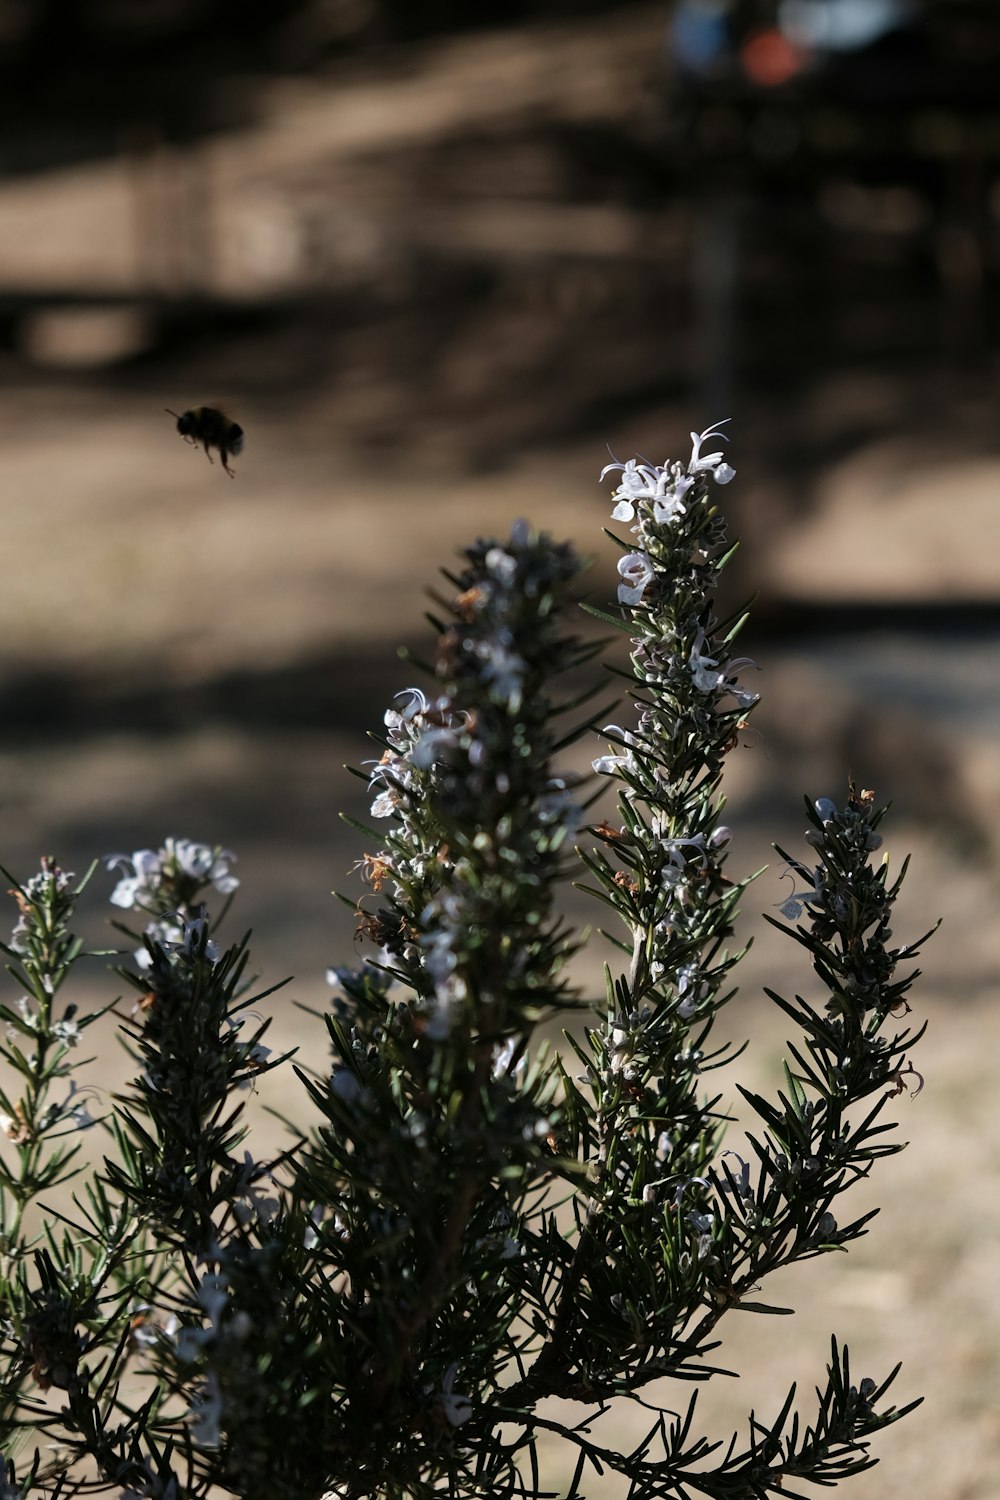 a bee flying over a plant with white flowers